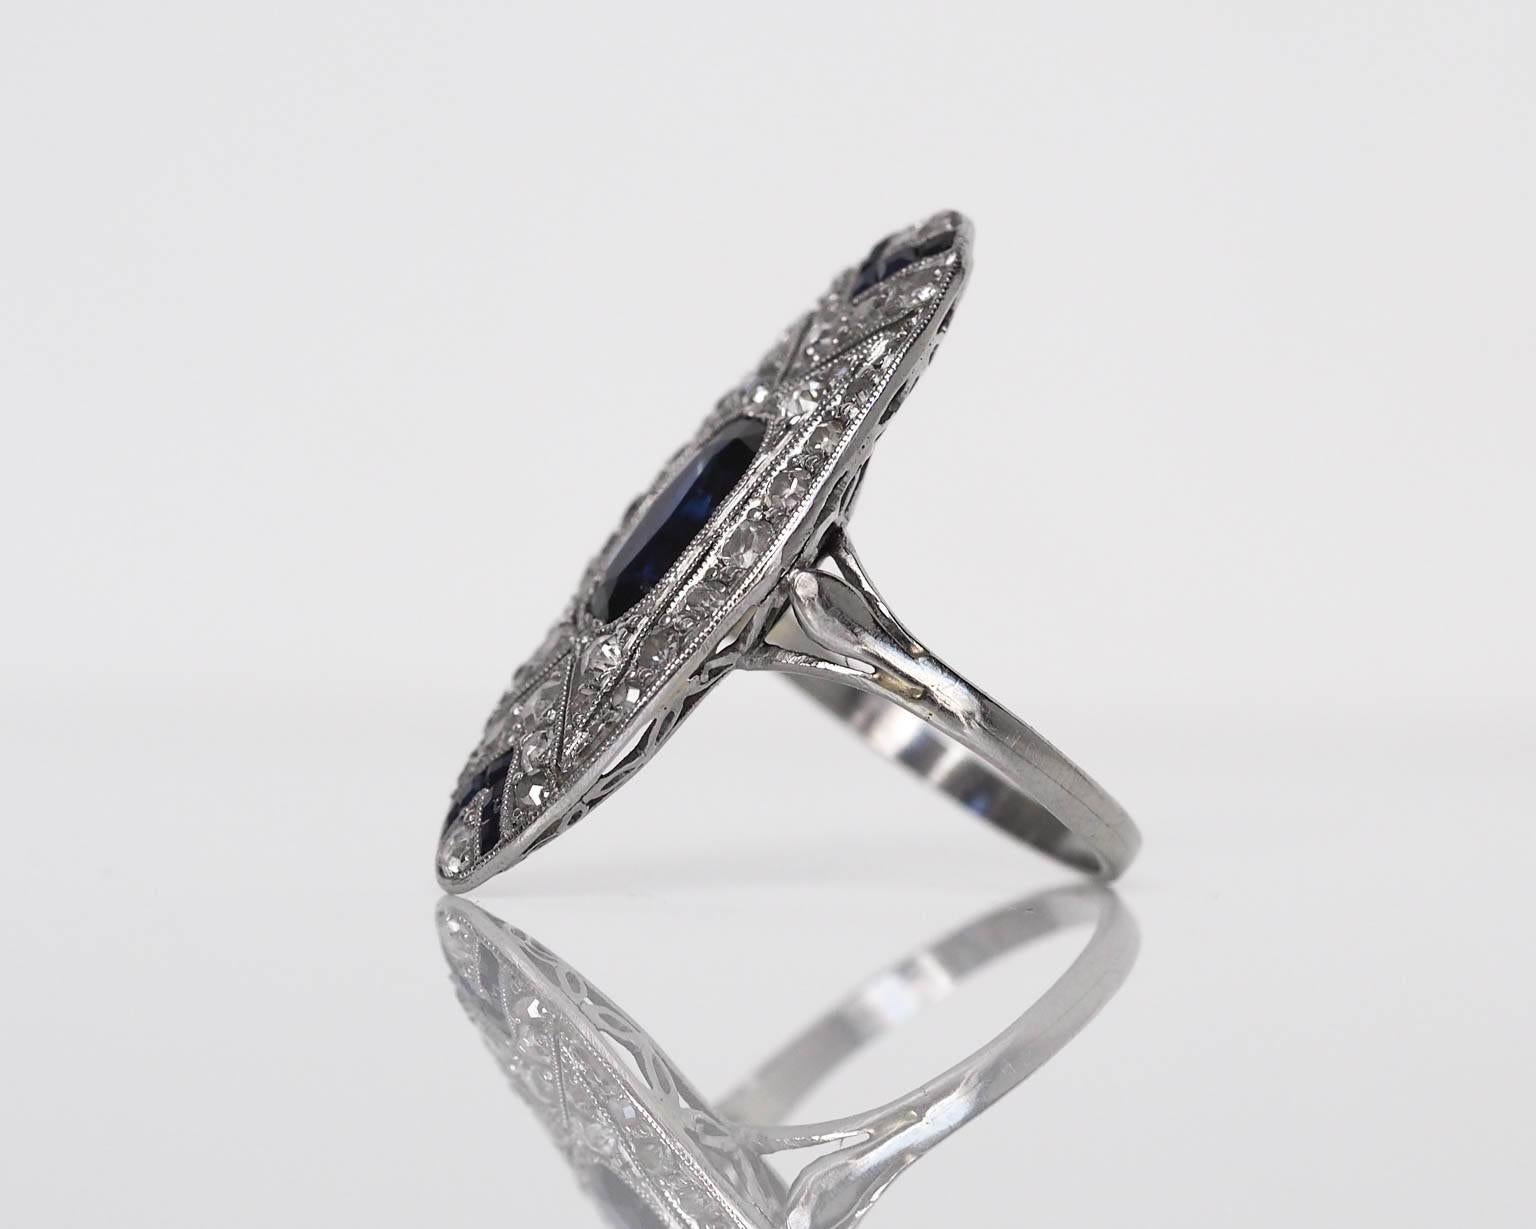 Here we have a beautiful piece which absolutely epitomized Art Deco. What we really appreciate and enjoy about this ring is the high quality of diamonds use throughout. The diamonds are ultra white F color and extremely clean VS quality diamonds as